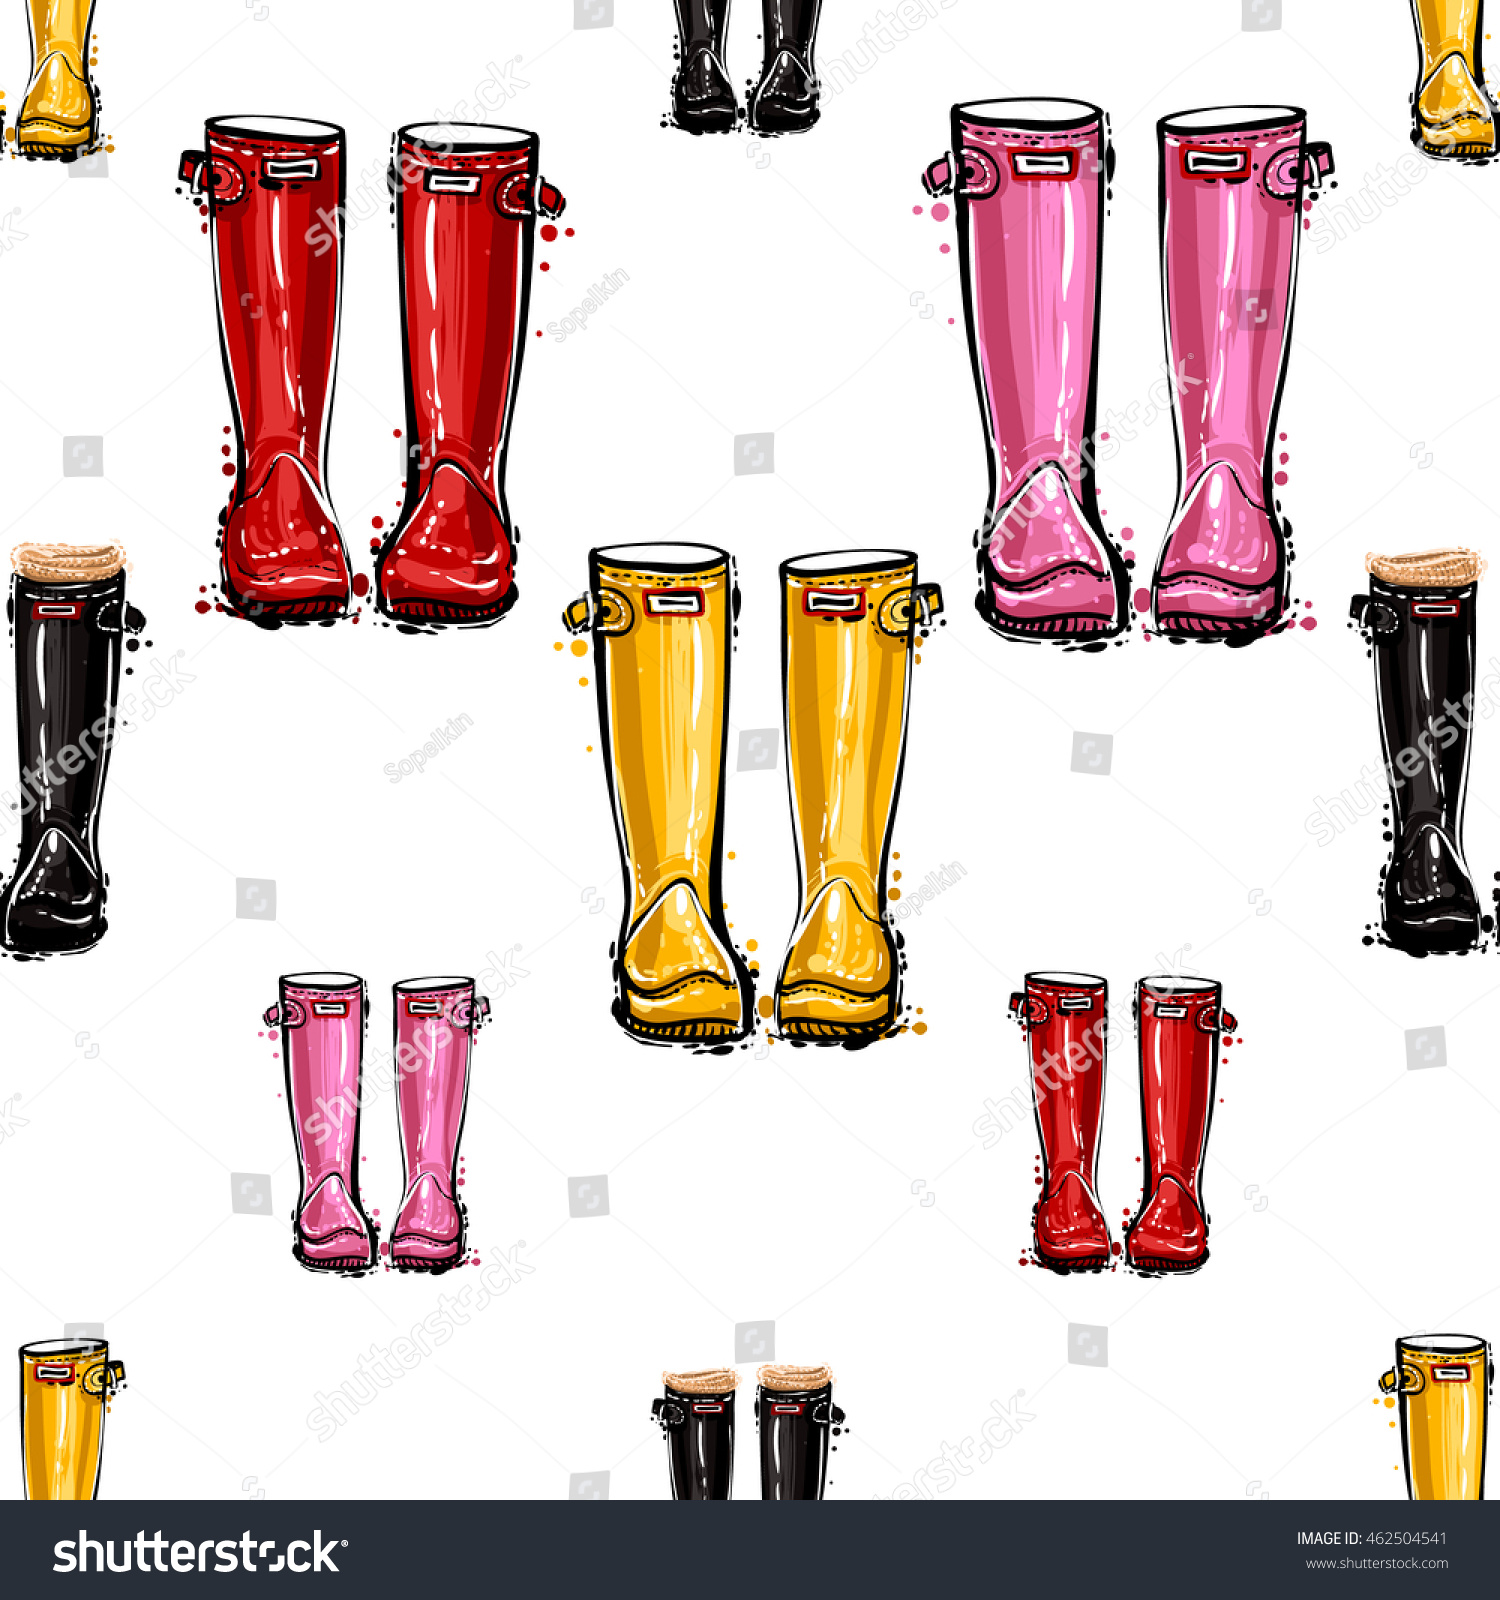 Download Vector Seamless Pattern Red Hunter Wellies Stock Vector ...